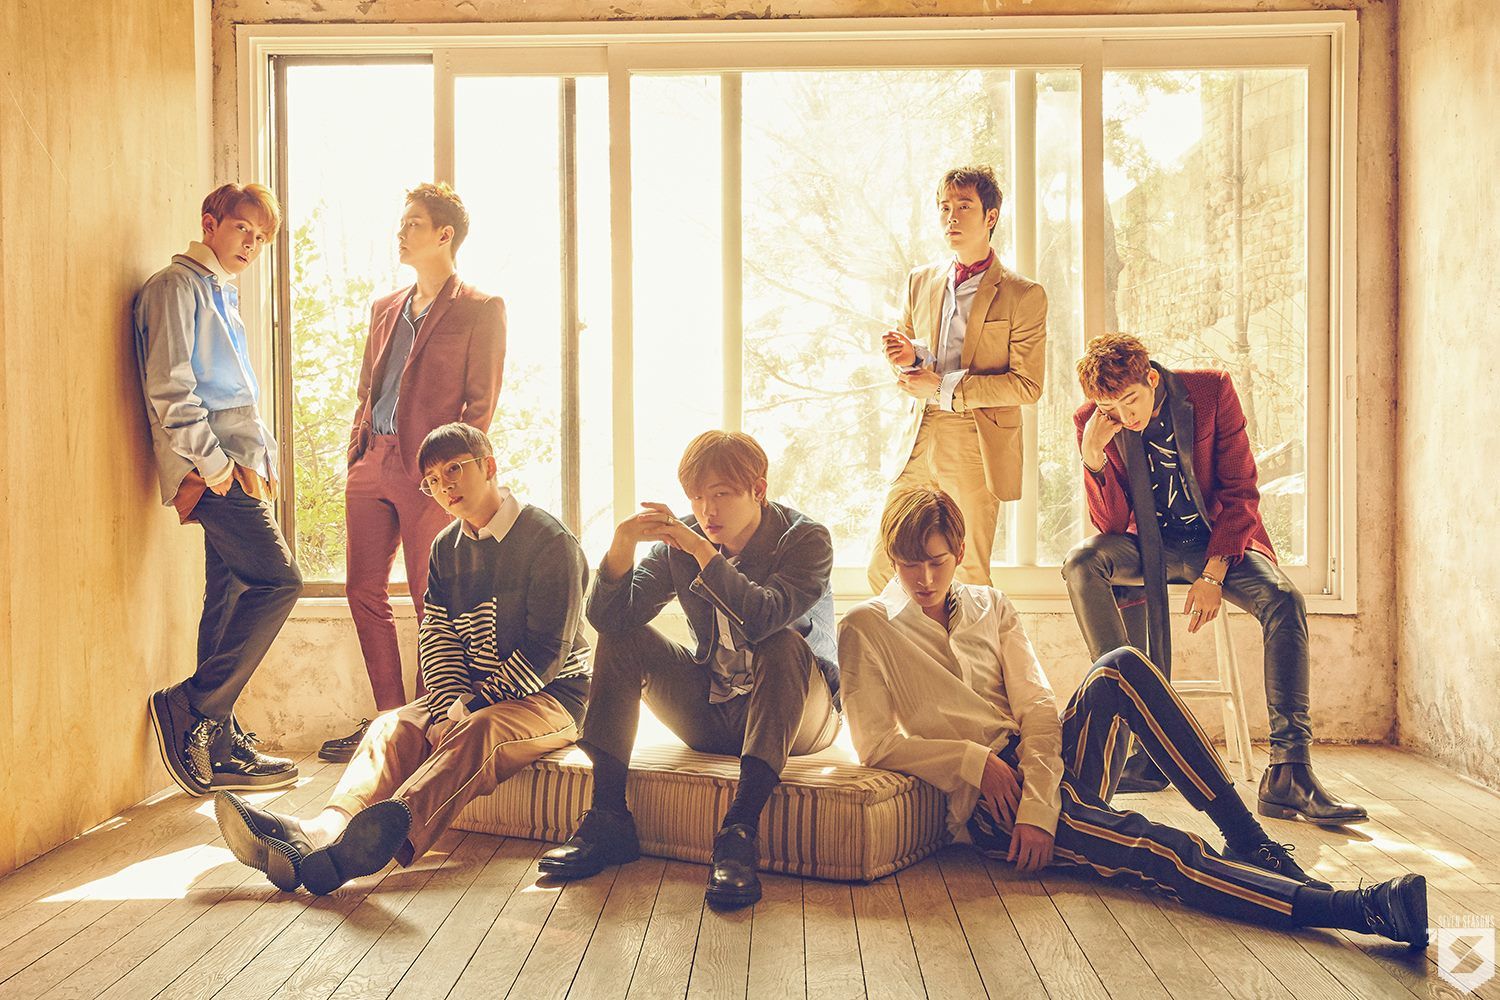 1500x1000 Update Block B Shares Group Teaser Photo And Zicos Individual Teaser For Blooming Period